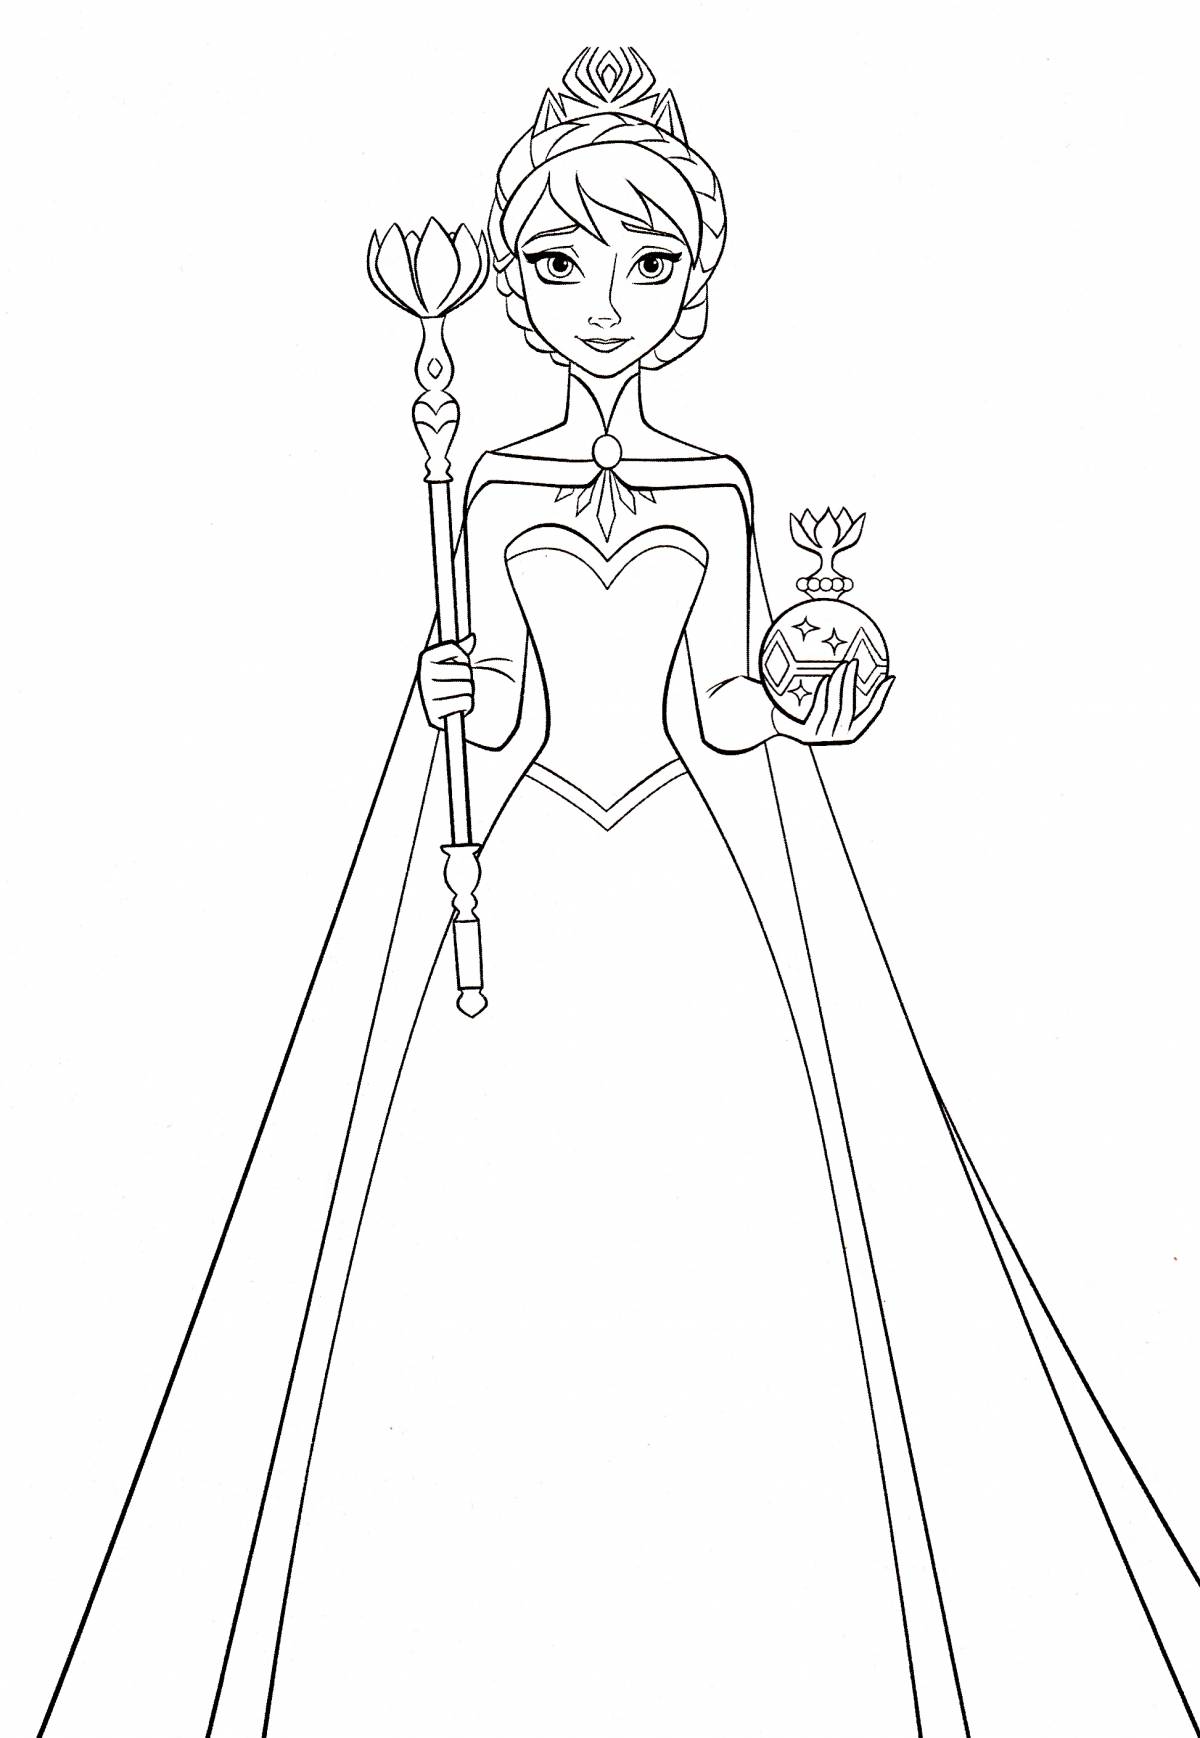 Royal queen coloring page